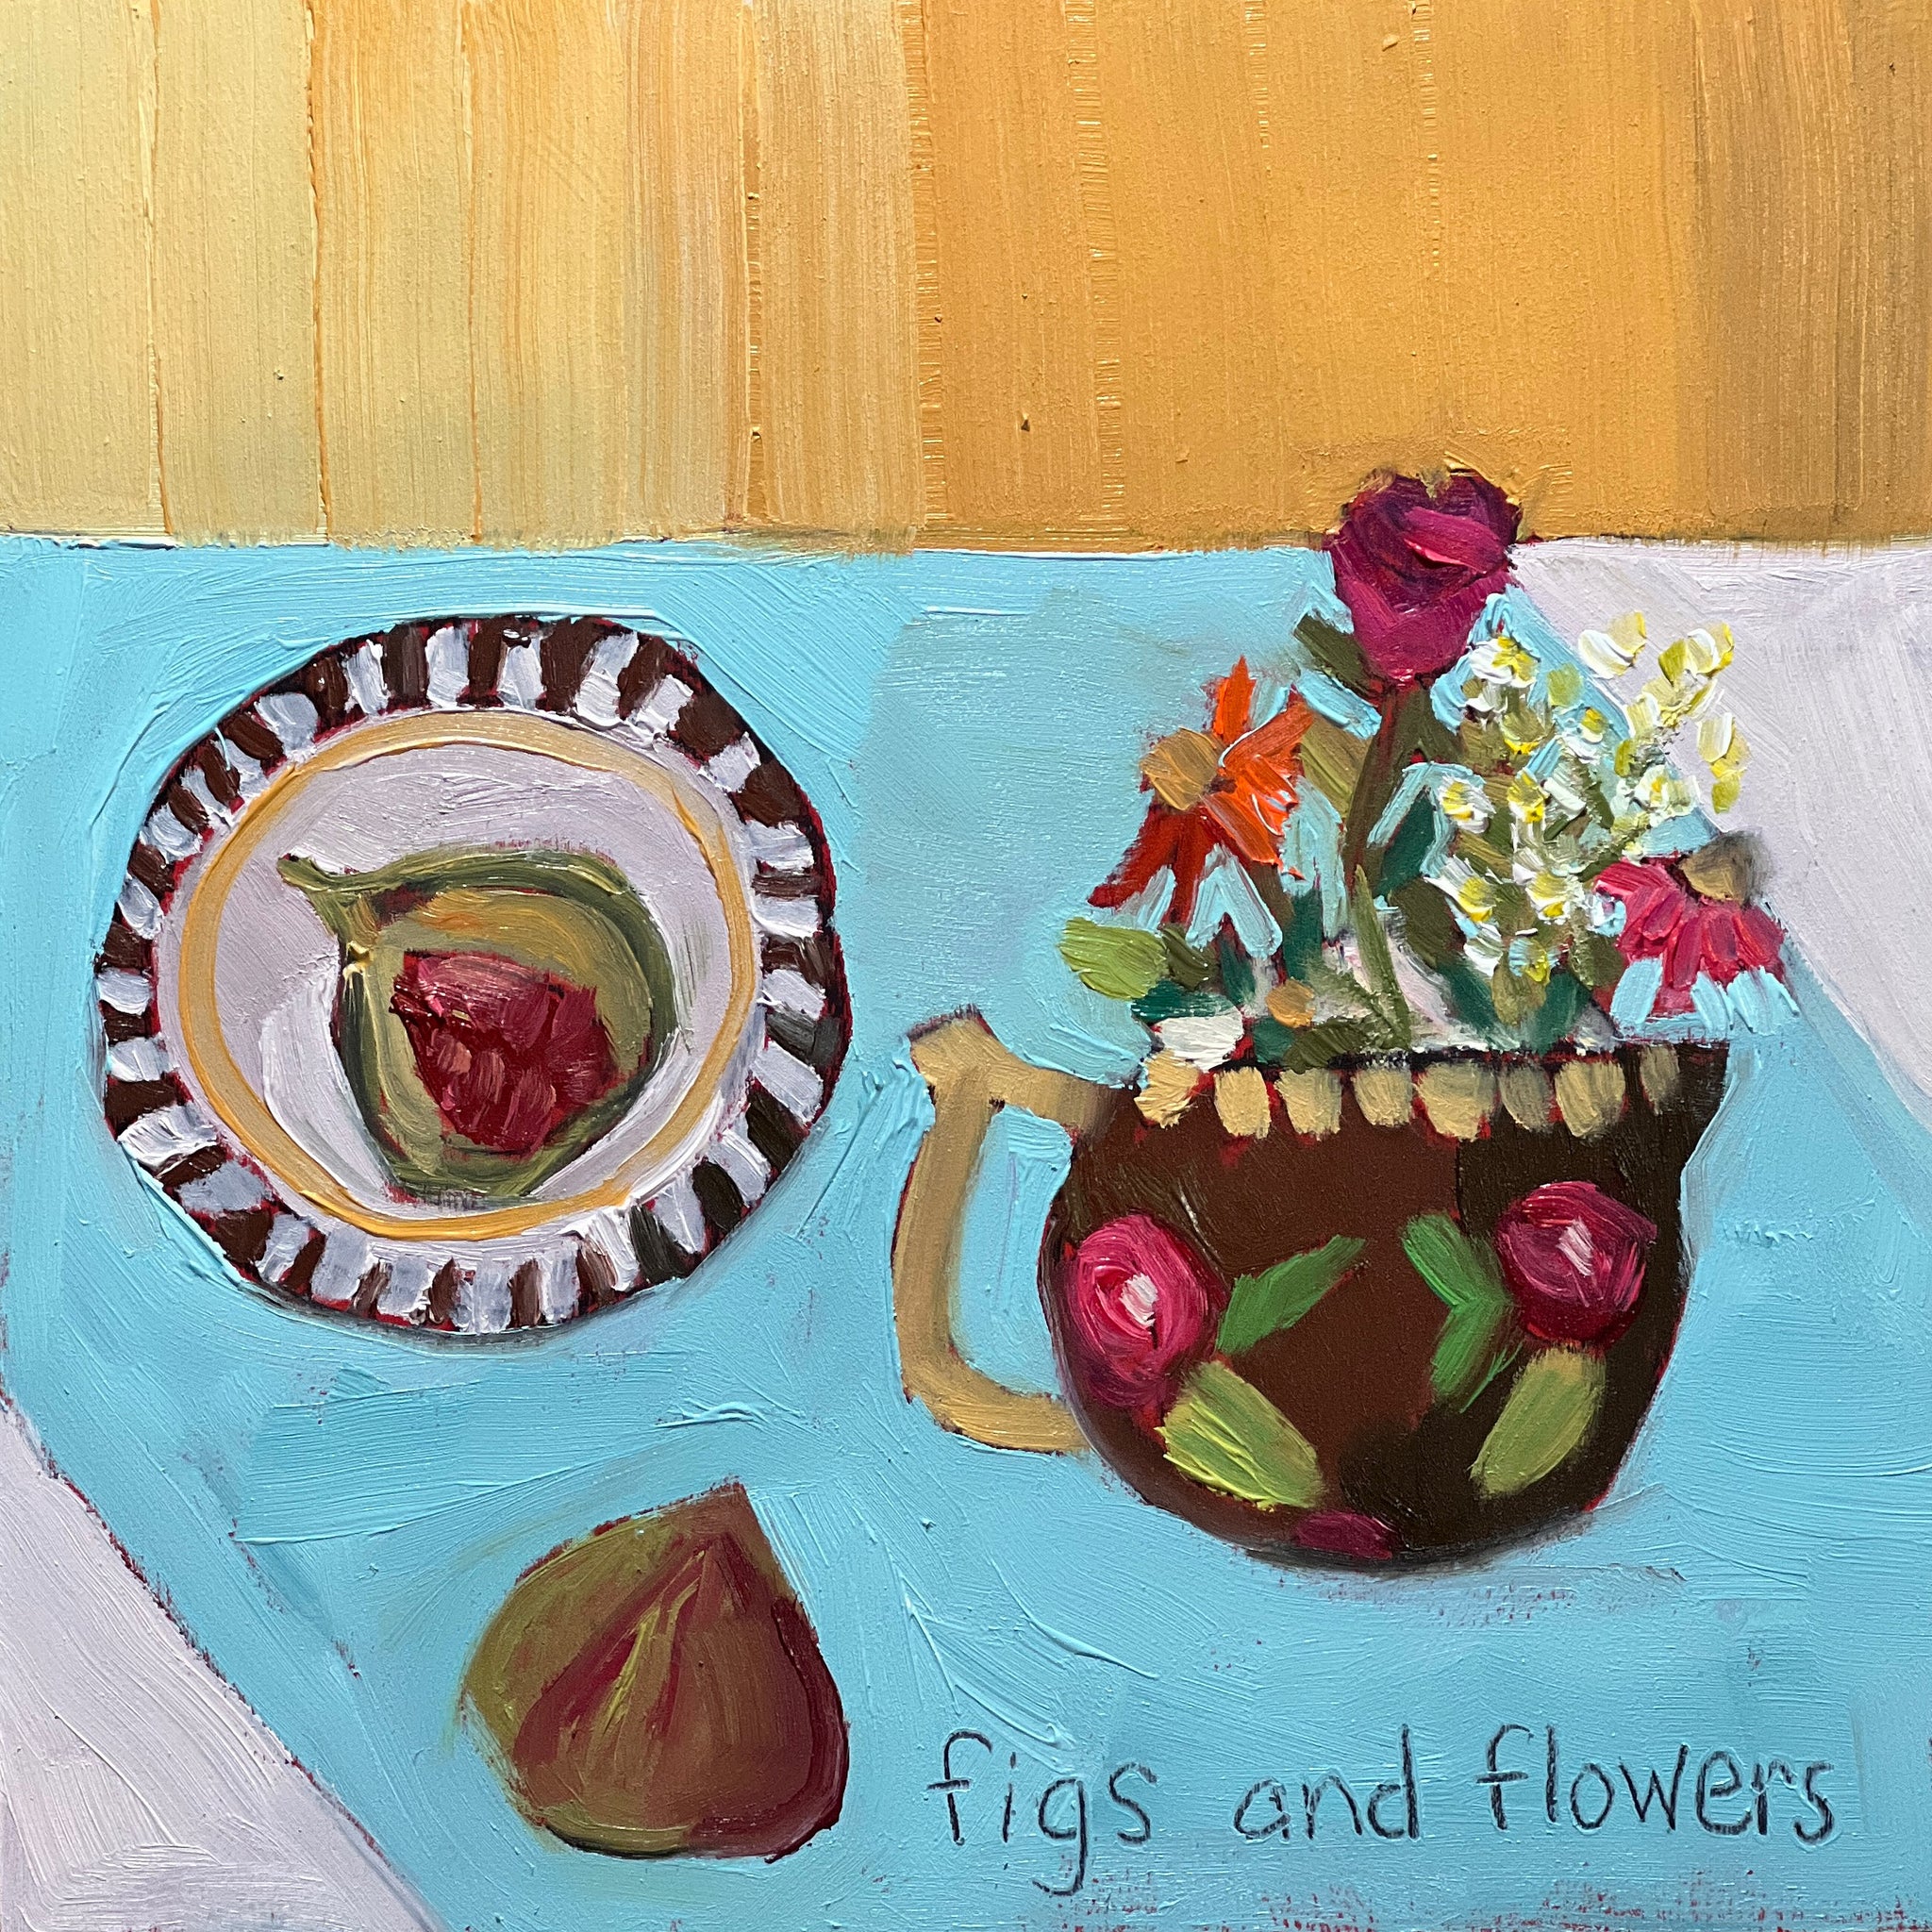 2259: Figs and Flowers